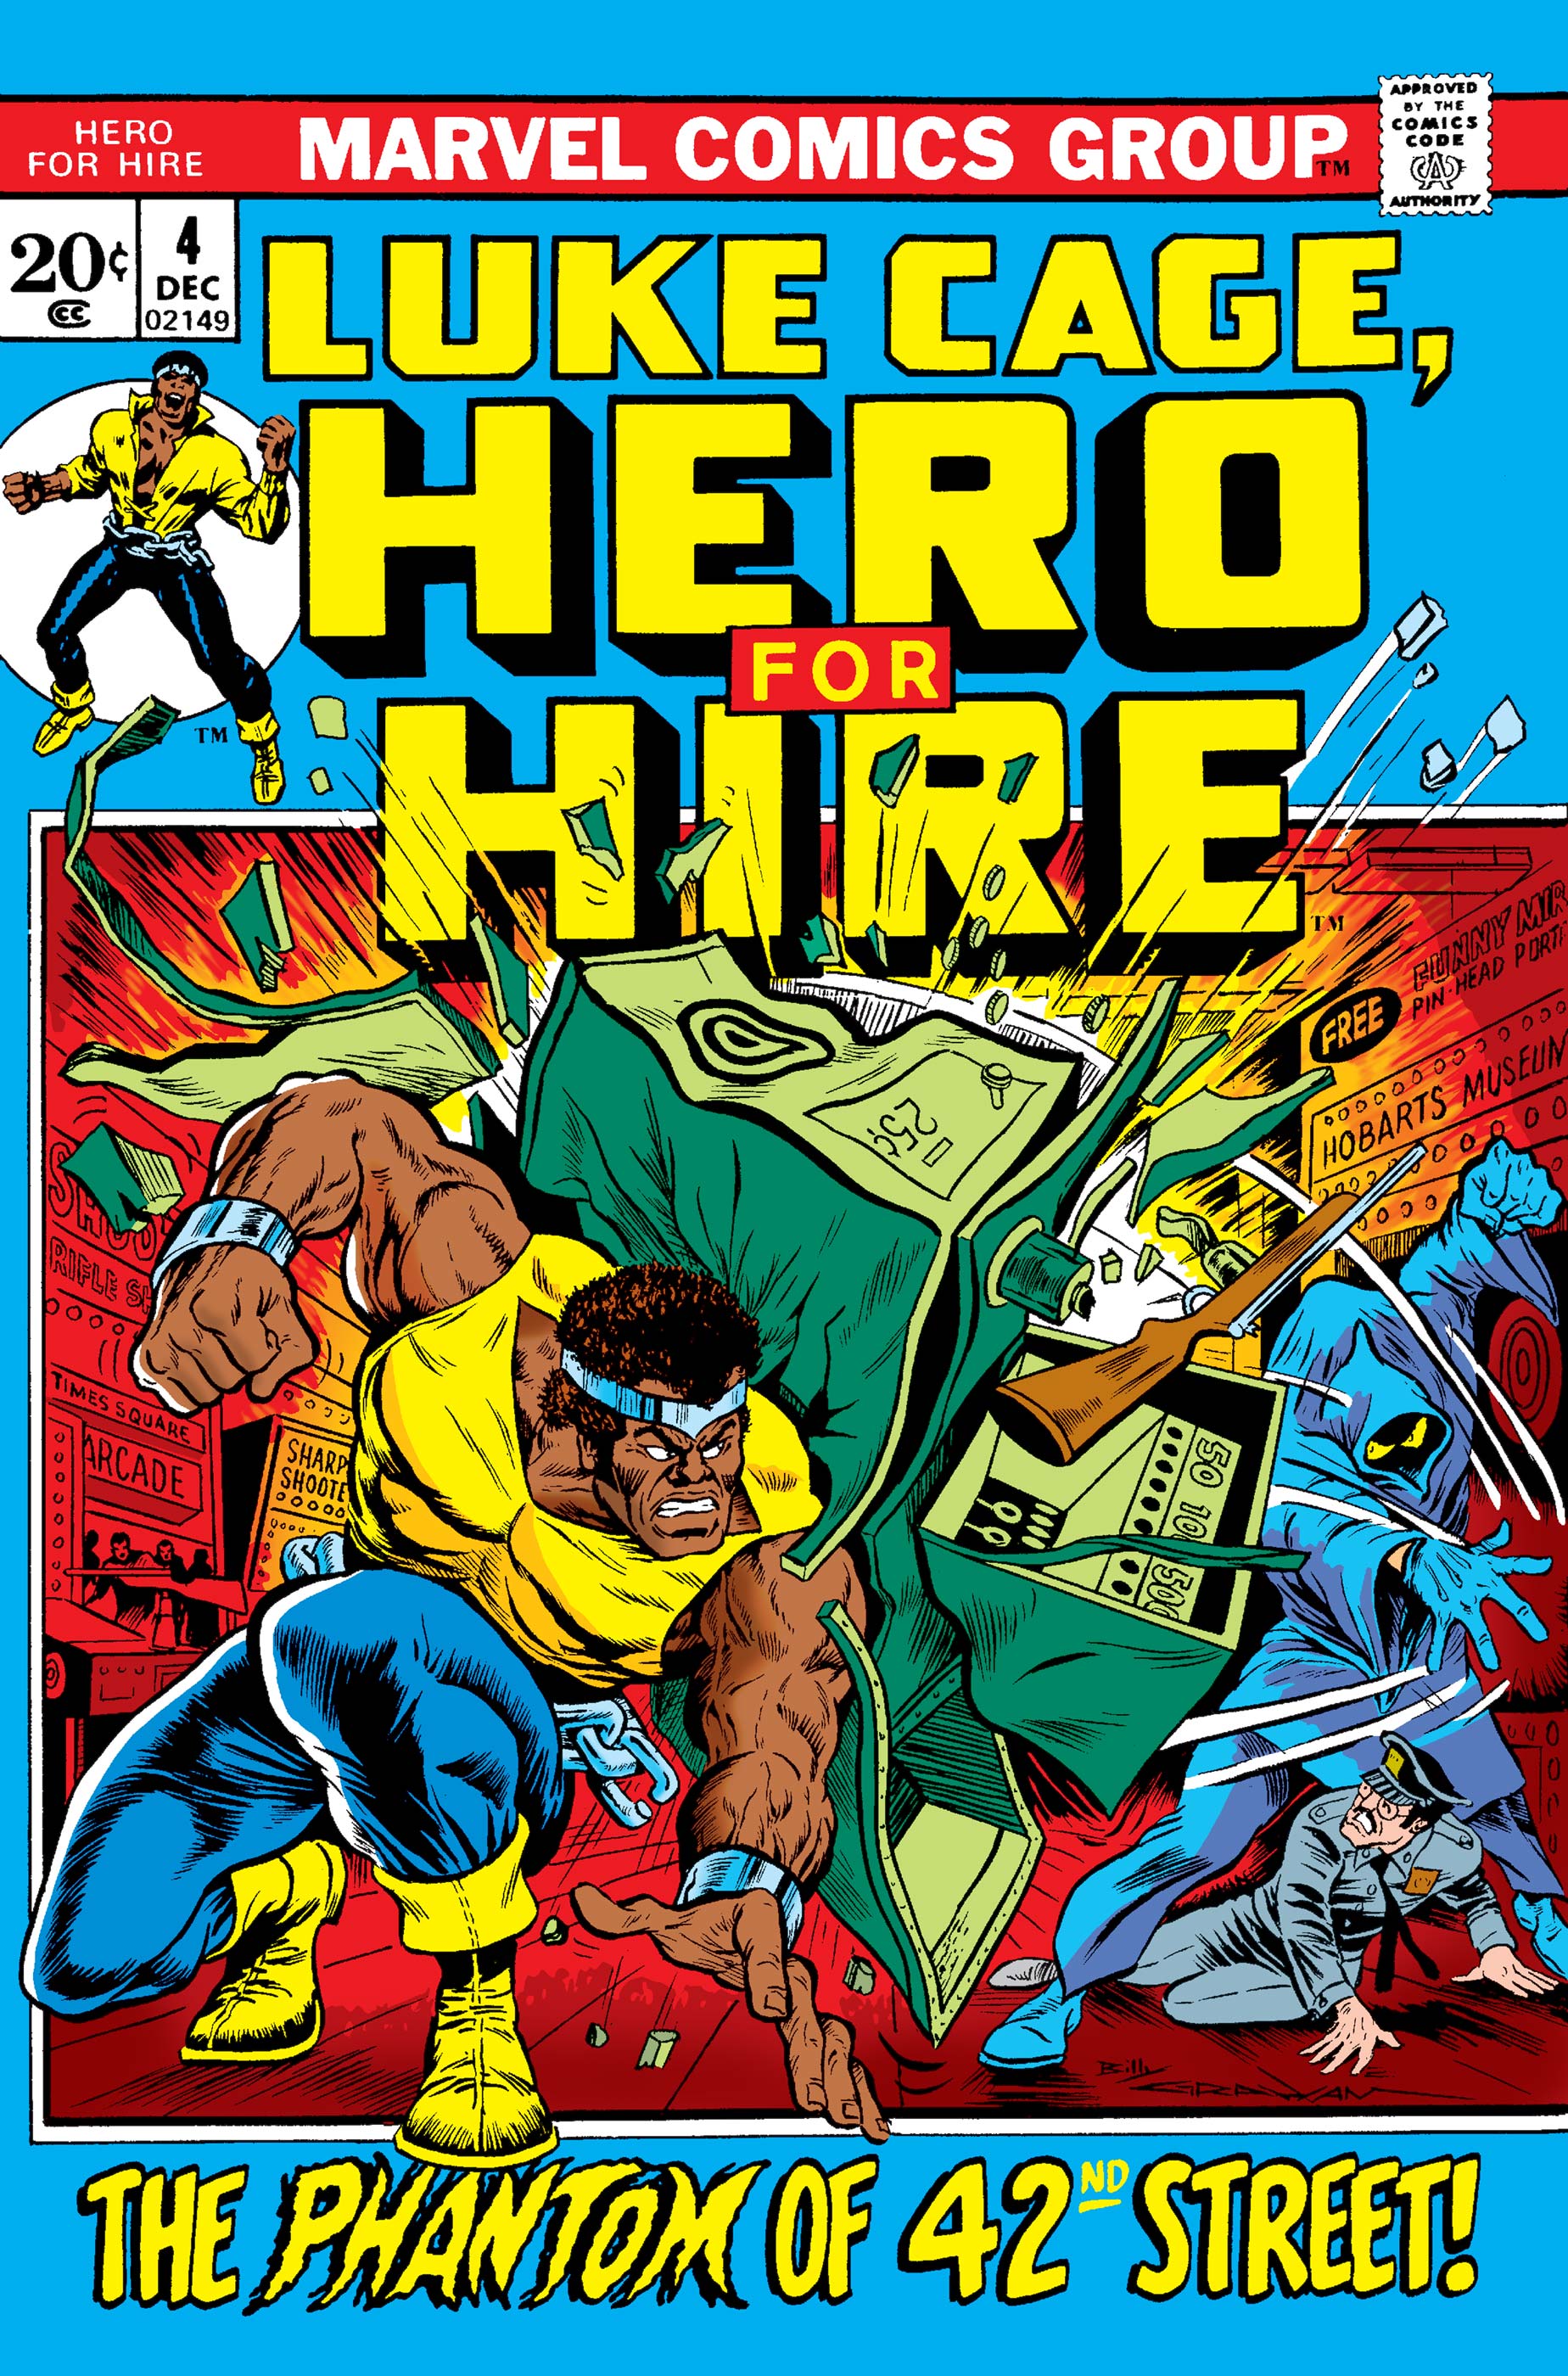 Hero for Hire (1972) #4